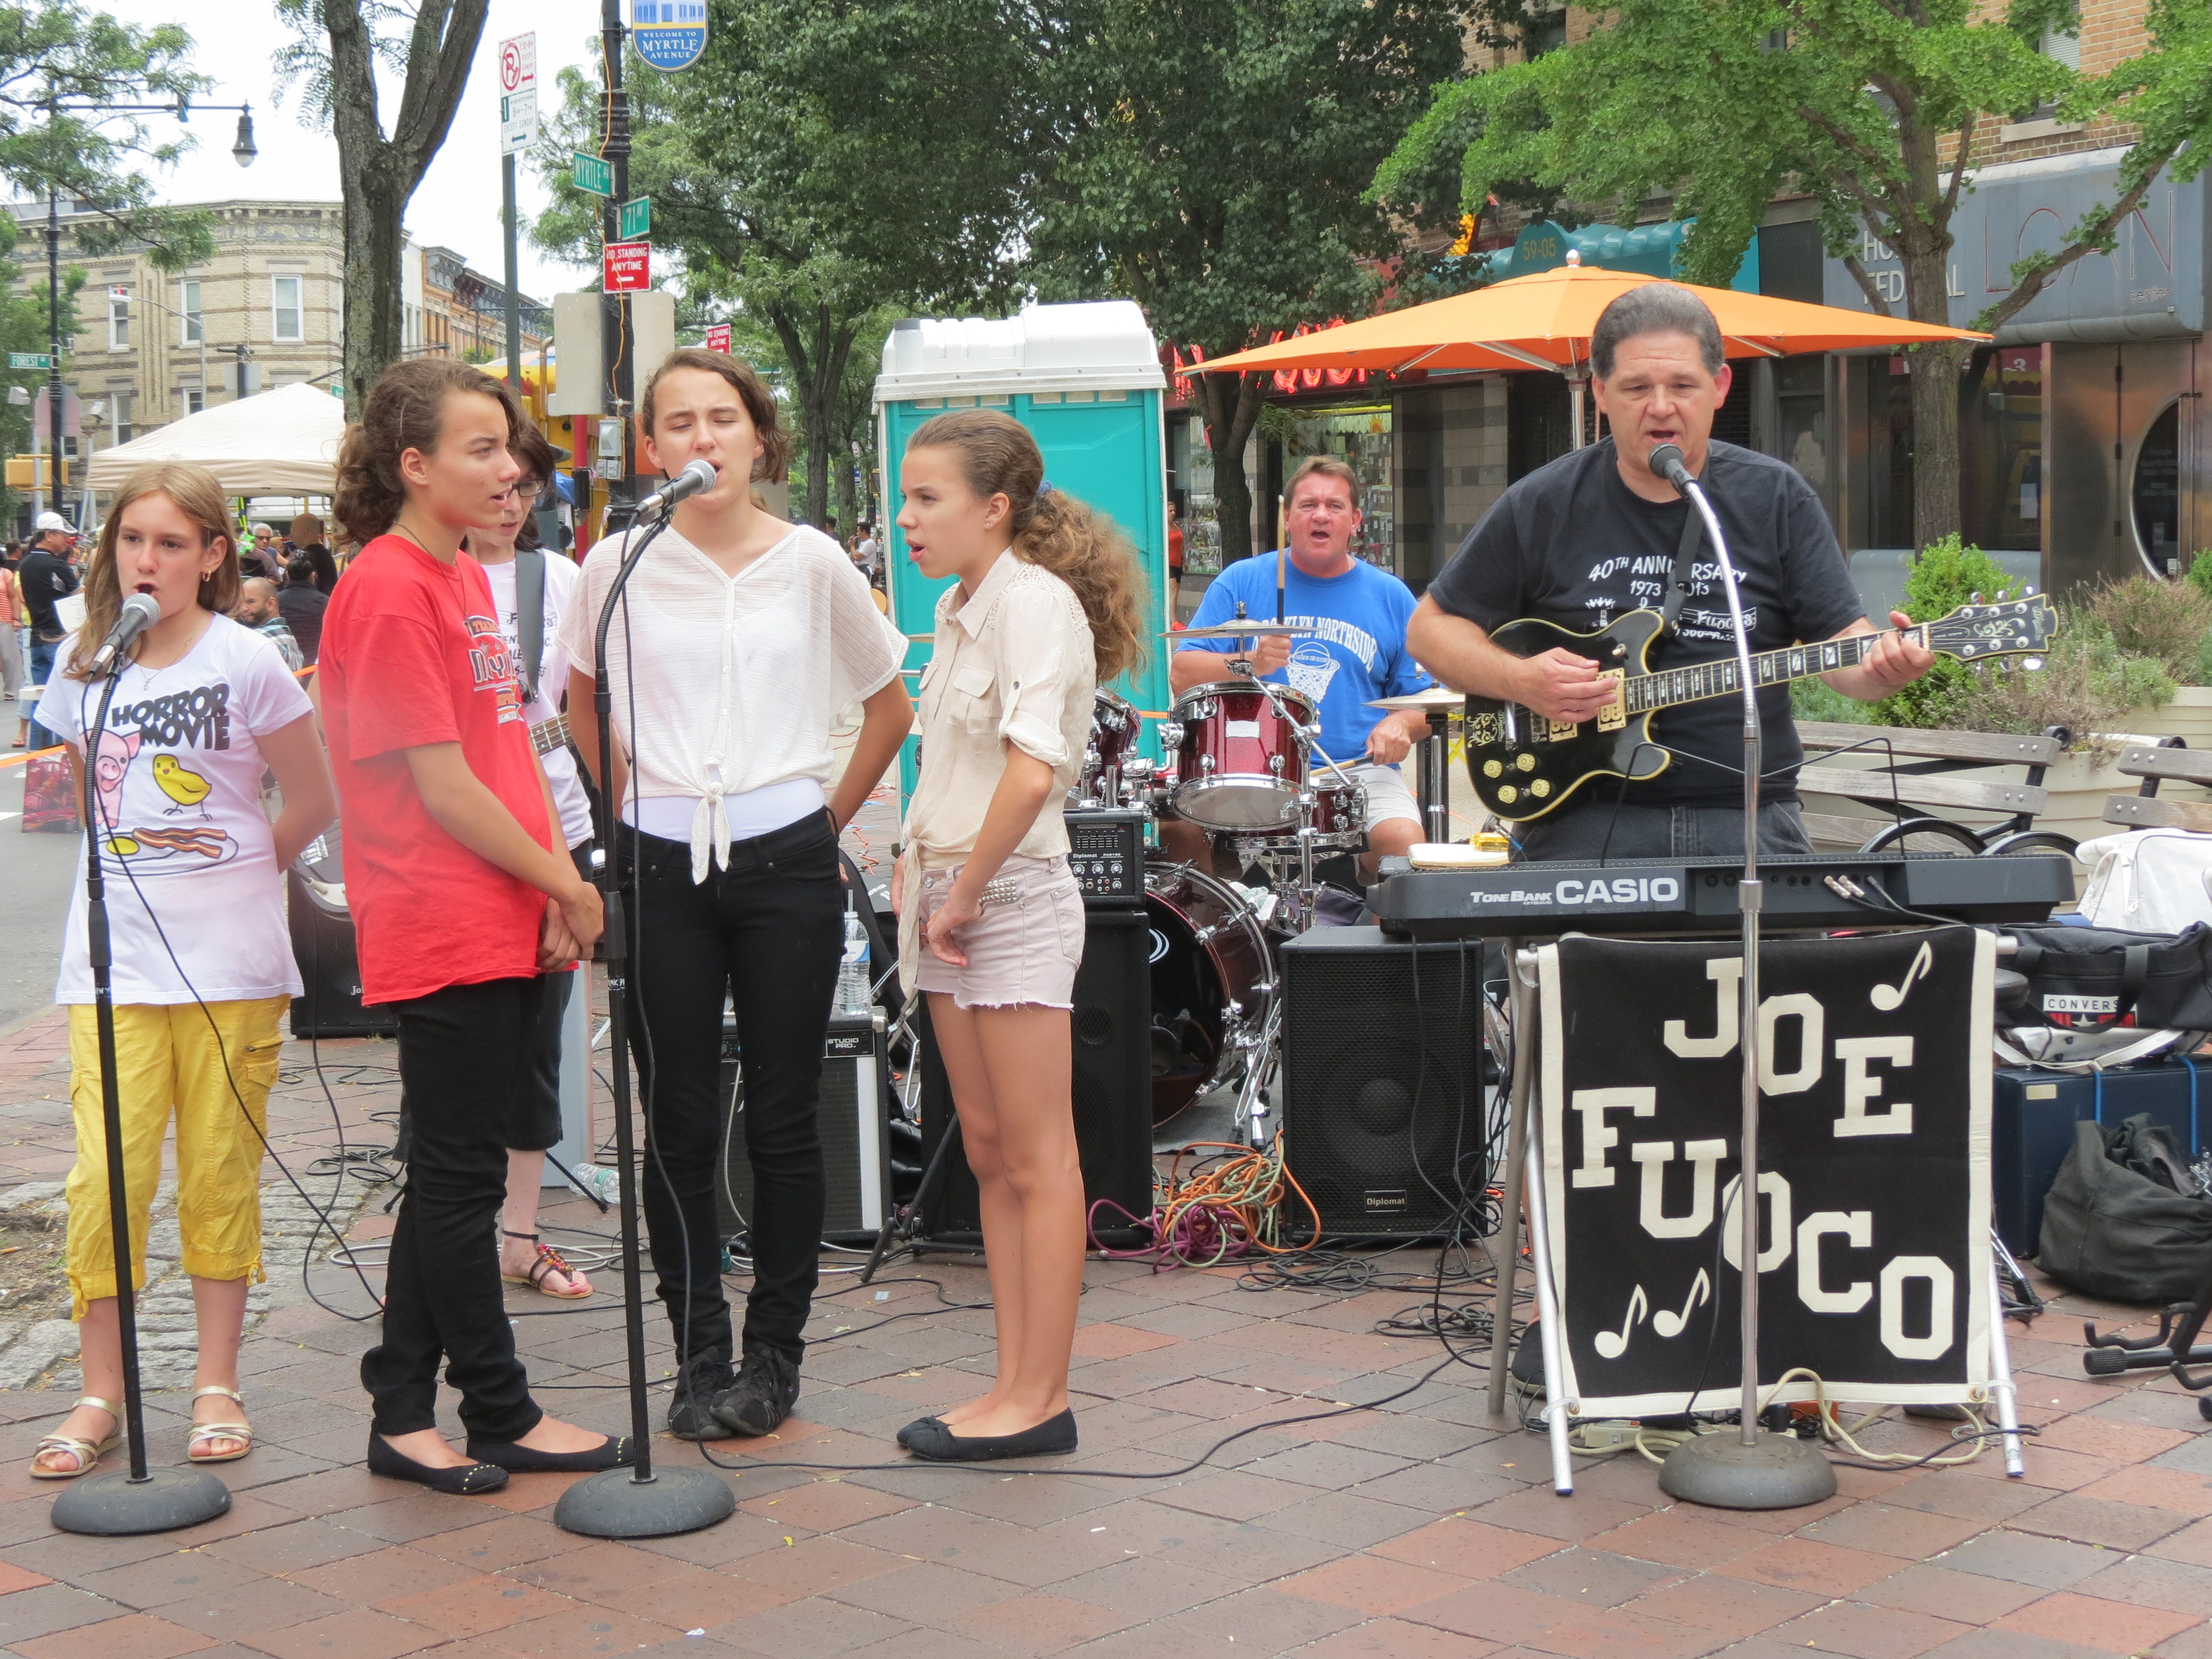 Joe Fuoco and his band entertained the crowd with classic rock hits throughout the day.